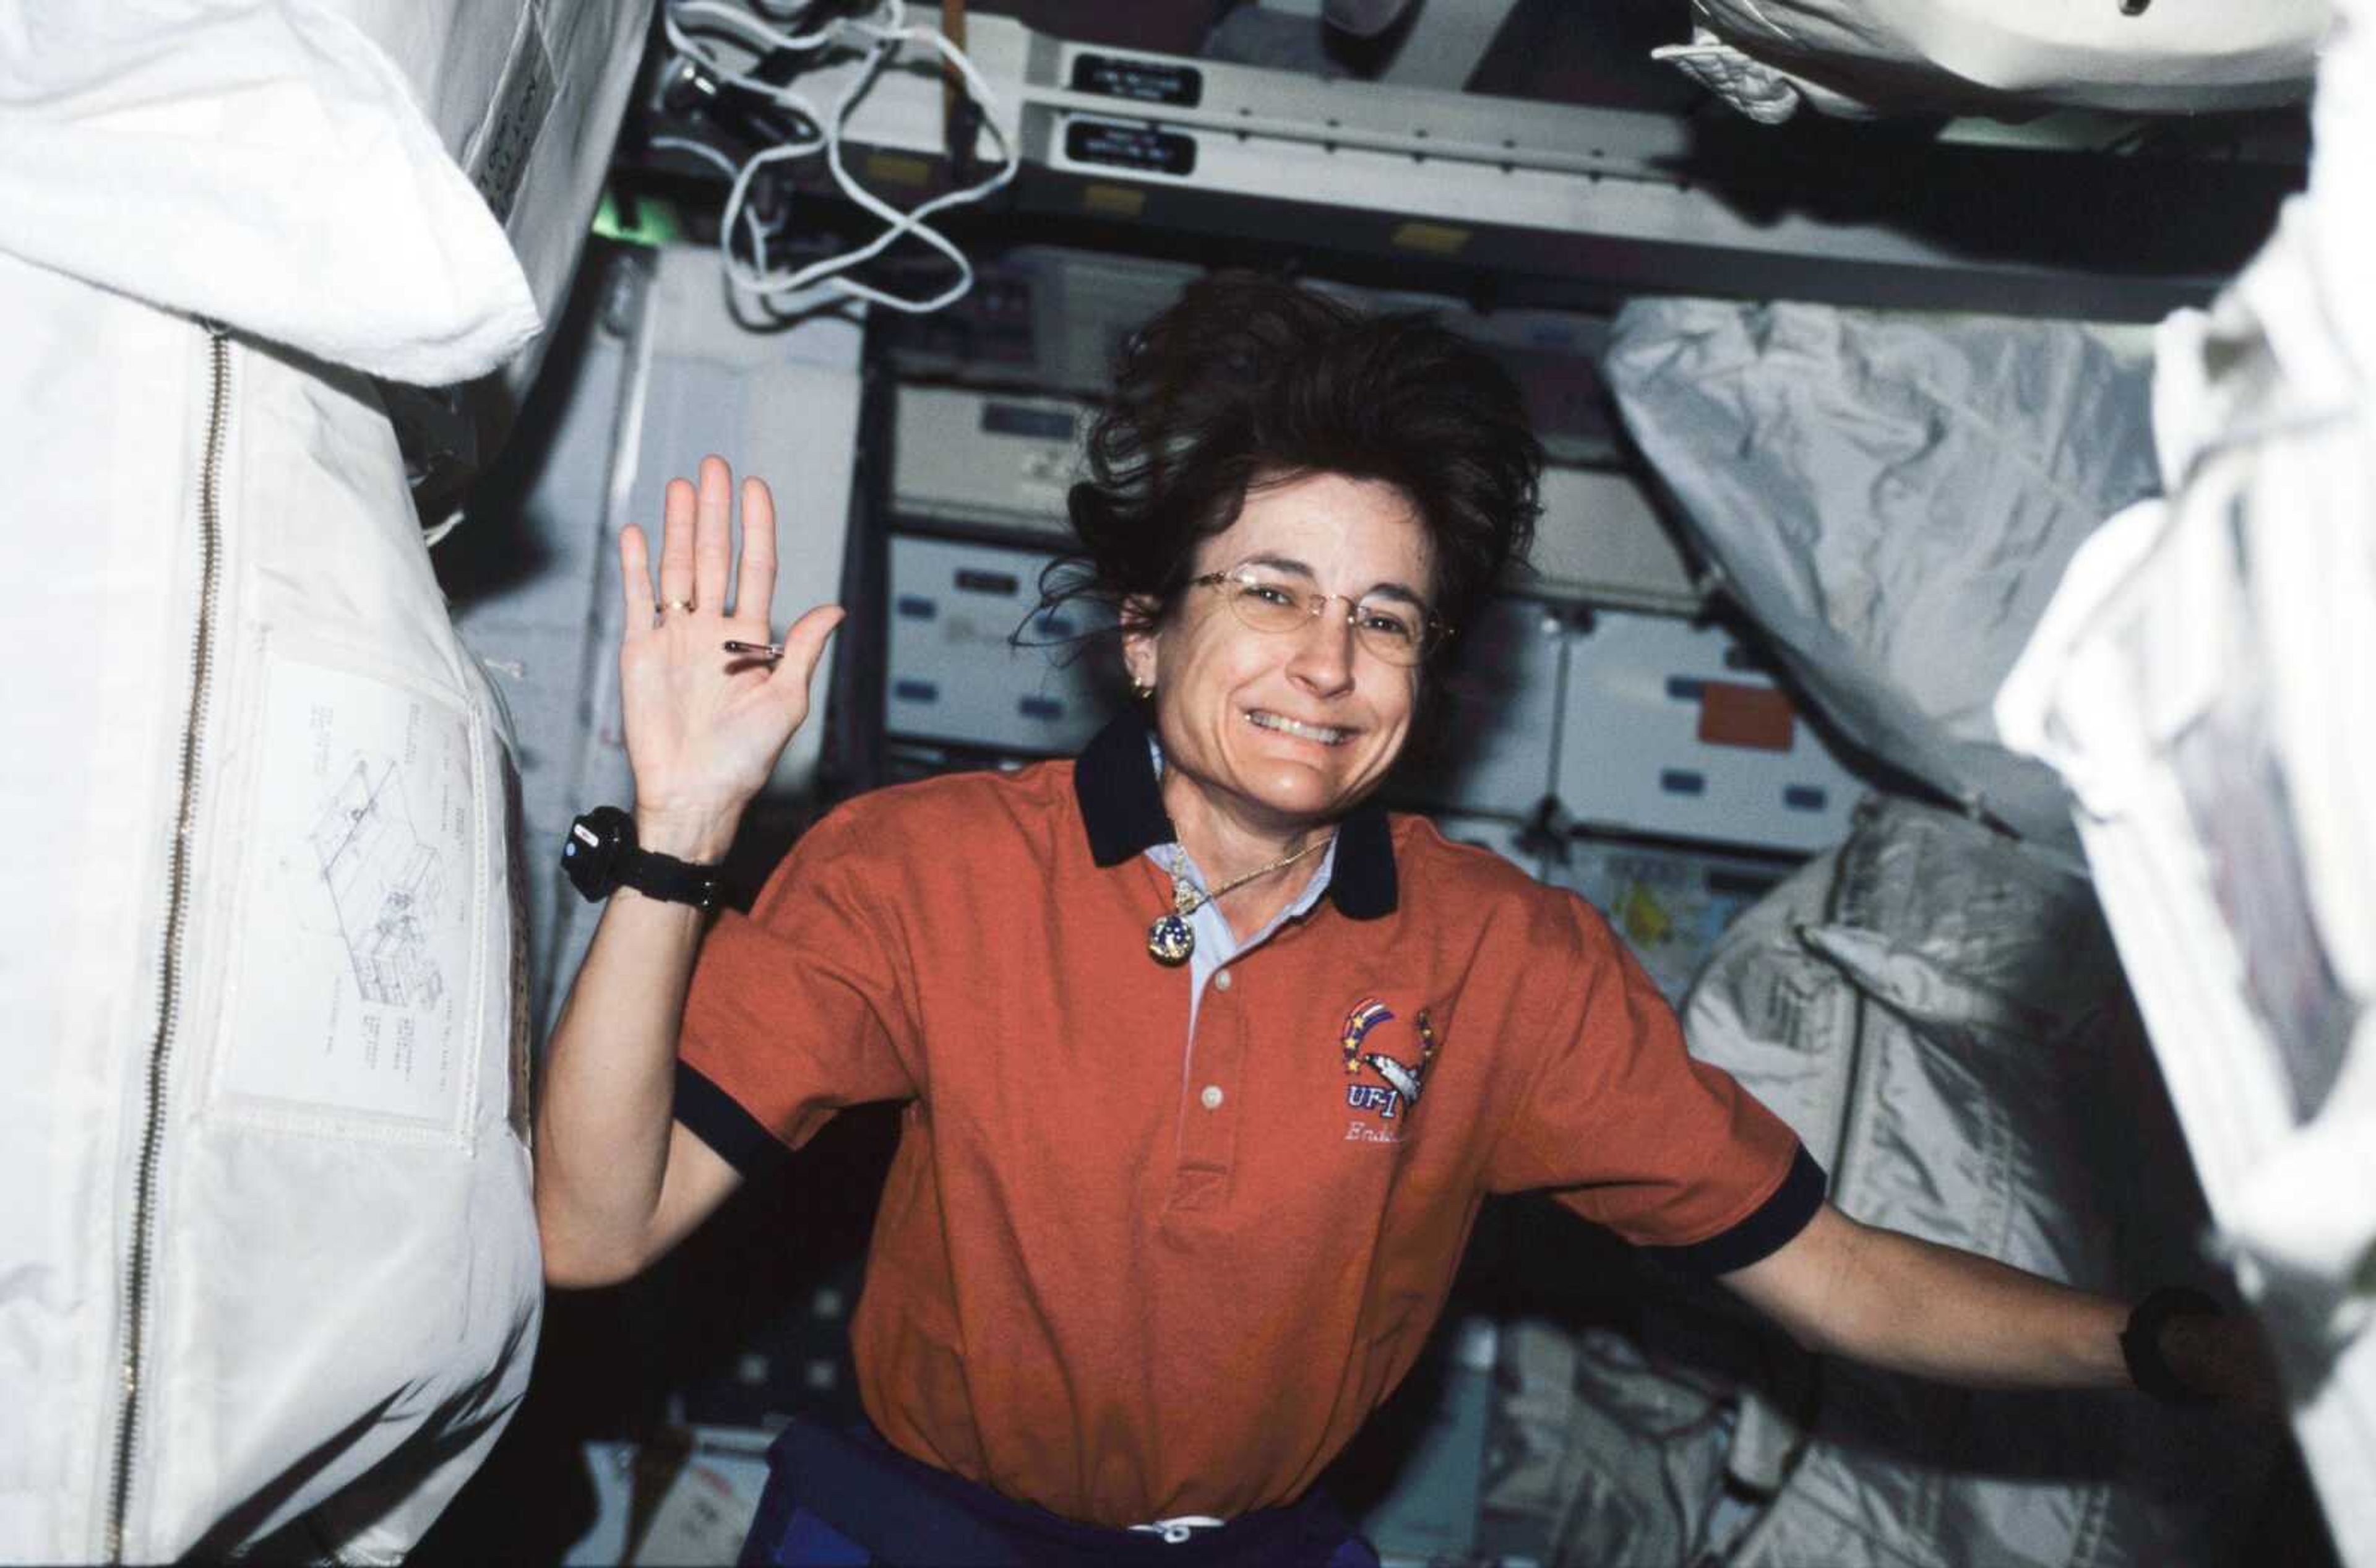 Linda Godwin waves while she transfers stowage goods from Endeavour to the International Space Station.

